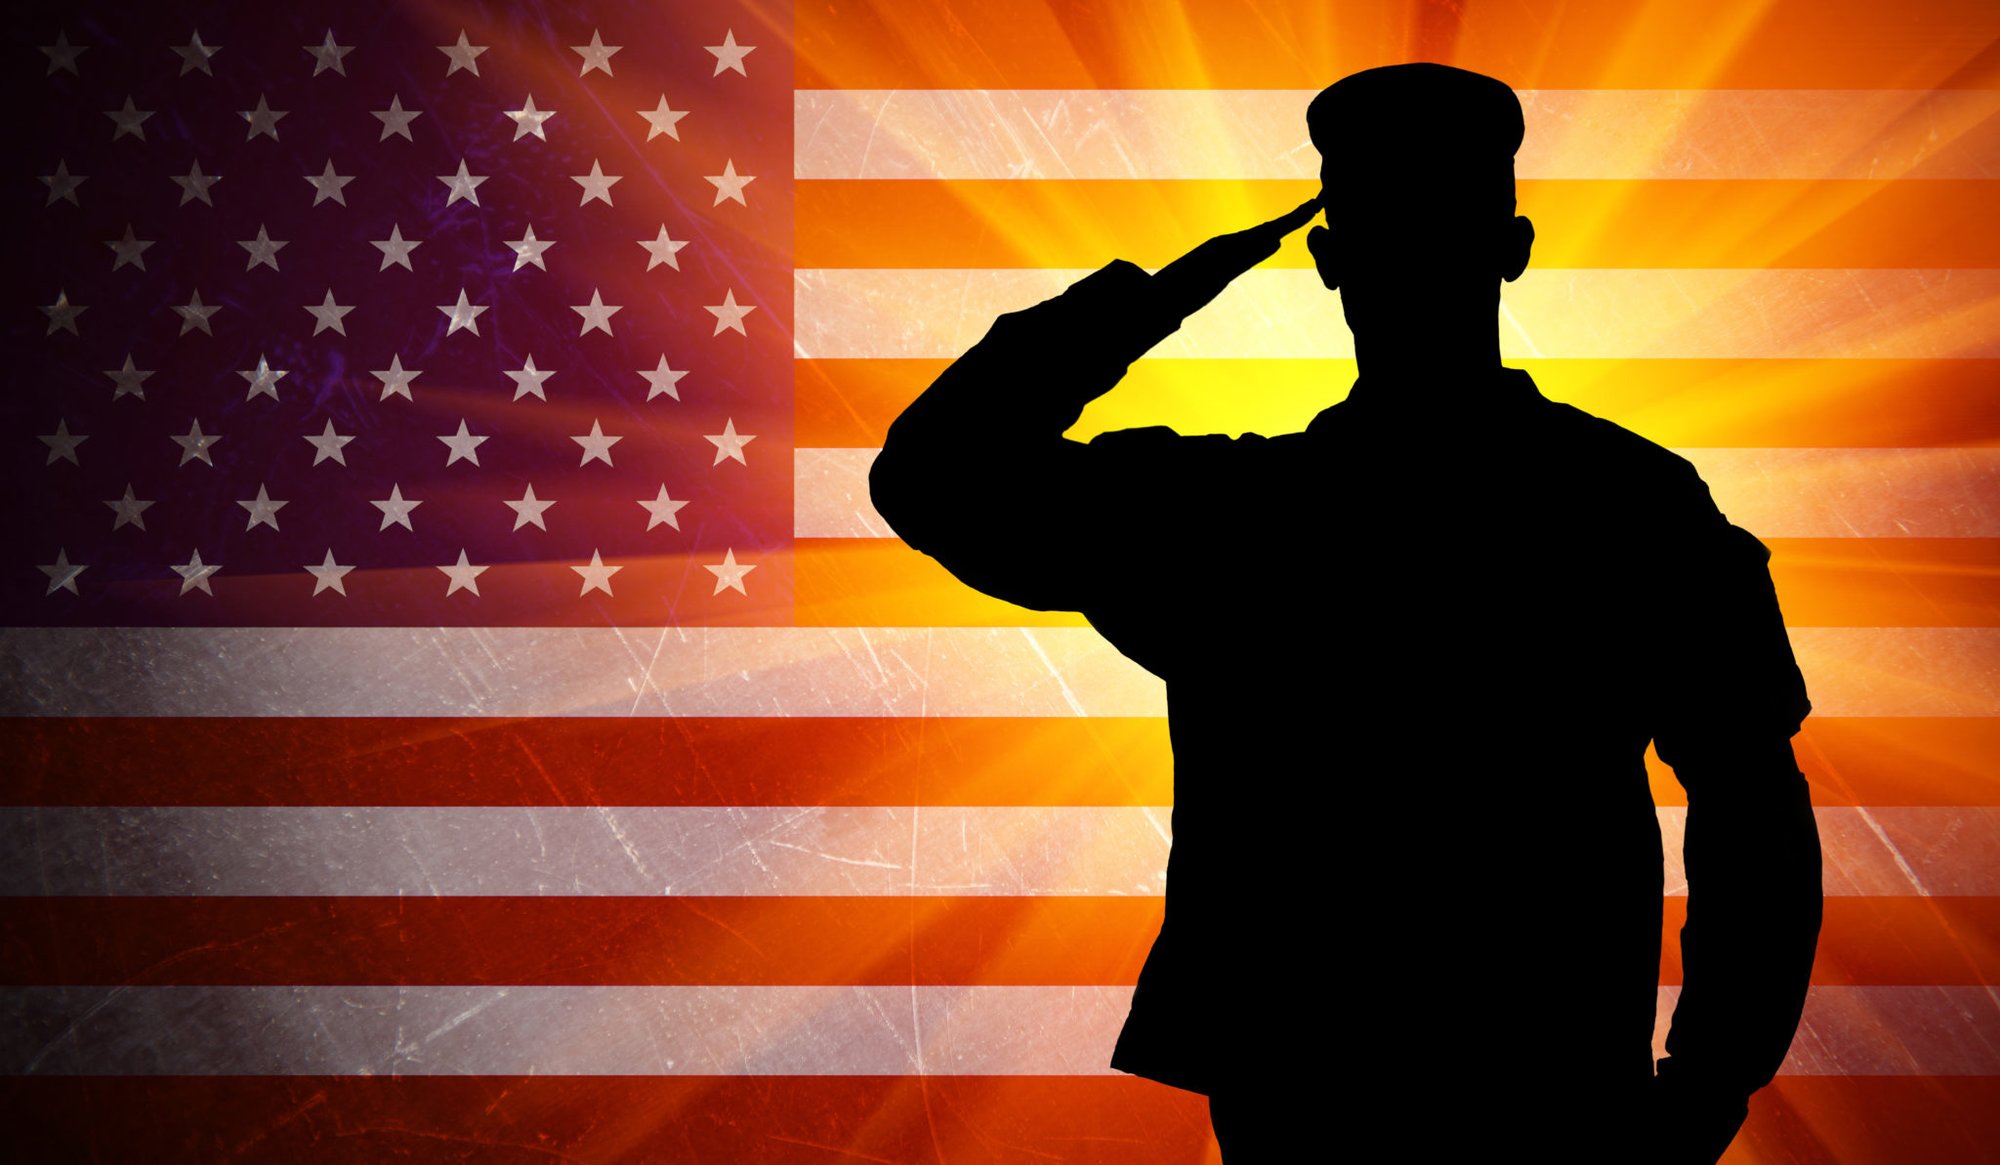 Proud saluting male army soldier on grungy american flag background